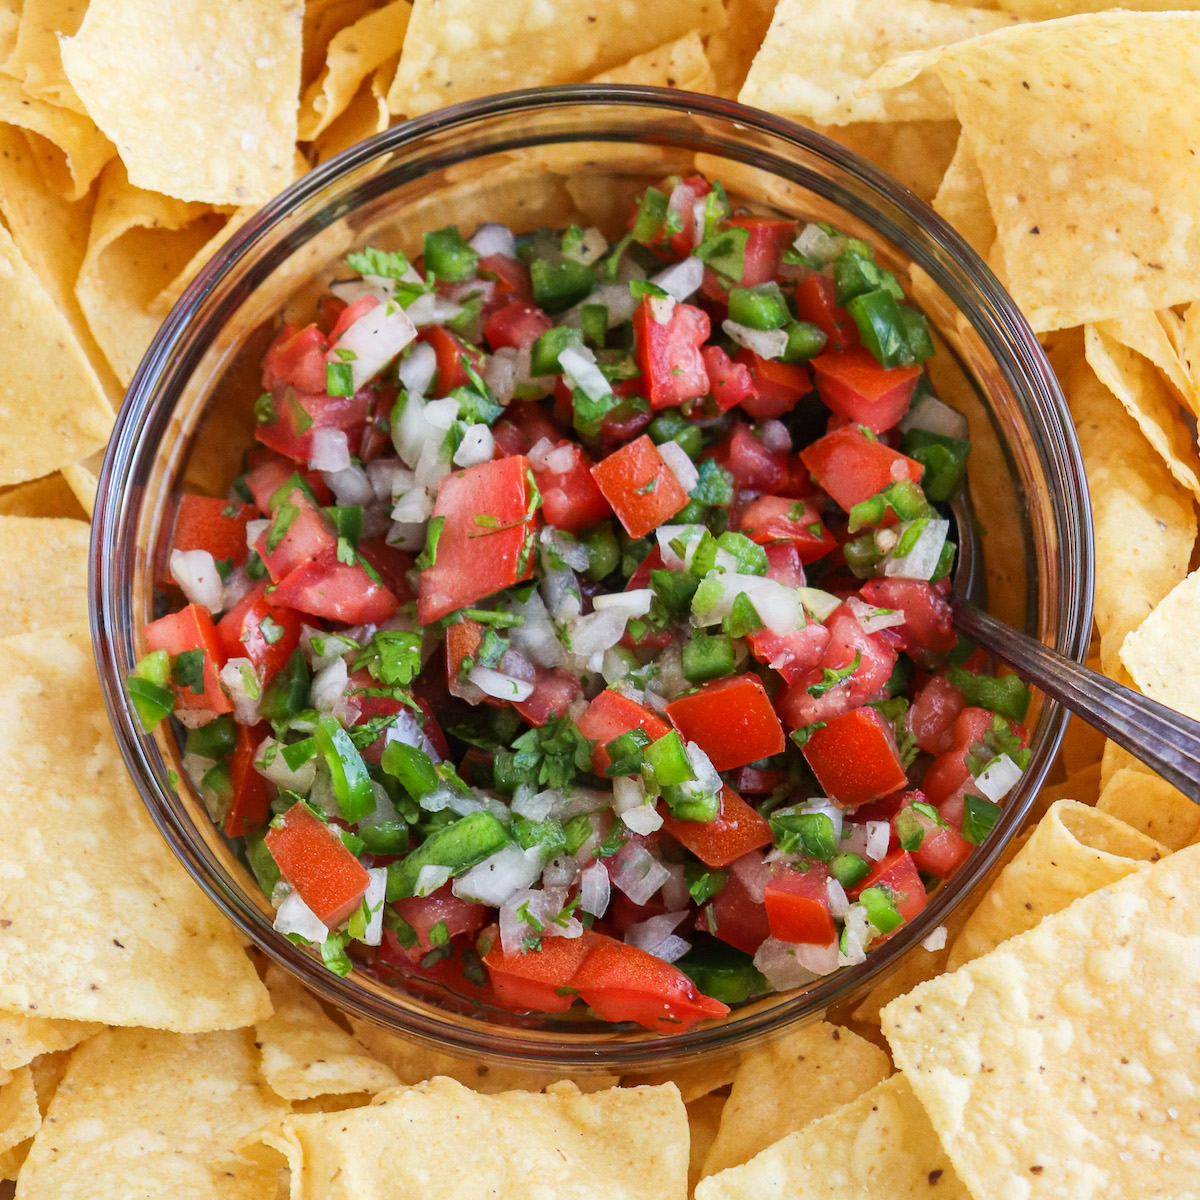 The bowl is filled with a vibrant mix of diced tomatoes, onions, jalapeños, and cilantro. The ingredients are evenly distributed, and the colors are bright and contrasting. The texture is chunky and there are visible pieces of tomato and onion. The cilantro leaves are finely chopped and scattered throughout